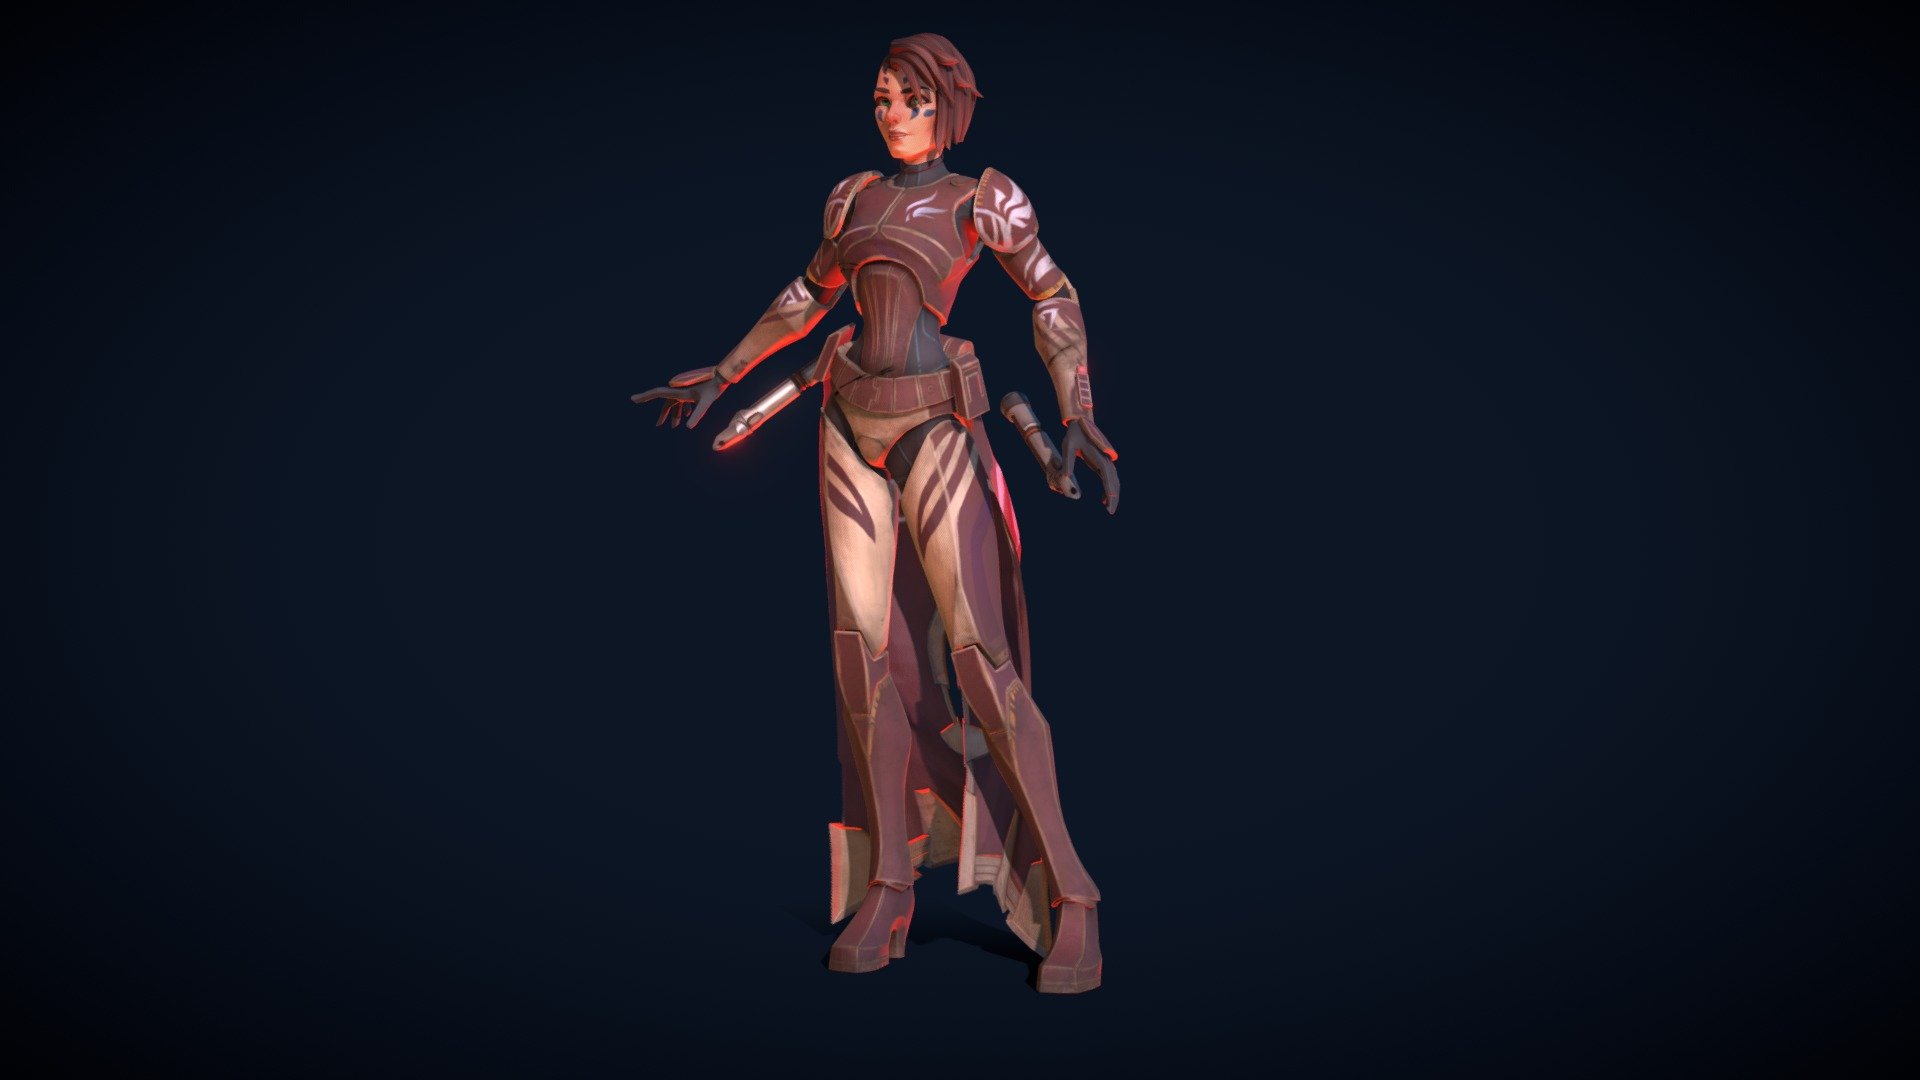 Model comes in 3 versions :

-FBX without skeleton 
-FBX with skeleton &amp; a flying anim sample 
-AKT (akeytsu file with the rig, skin &amp; anim sample) handpaint PBR texture set (TGA, 4K, uncompressed)

Notes are included in order to understand how these files works. You can import it on engine that supports FBX. Normal maps are Y- (perfect for 3dsMax/UE4 but will work on any other engine, just flip the green channel) and uses MIKK tangent space

While you can decide to redo the whole rig on maya/max/blender, I encourage you to try using akeytsu, you won’t regret it =)

Des Bisous ! ♥

NB : Since I am an artist, this model is NOT a ripped asset of any kind (as anything I do) I’ve made it myself for my own project, which means 2 things :

-these assets have to be used under the Editorial License ONLY
-these are my own artistic vision of it, so details may differ

Be sure to check out the full project here : https://www.artstation.com/artwork/gO4Pm

Same anim integrated in Toolbag : https://youtu.be/Rsz2YmEF6Y0 - Mevenn - Buy Royalty Free 3D model by Etienne Beschet (@etienne.beschet) 3d model